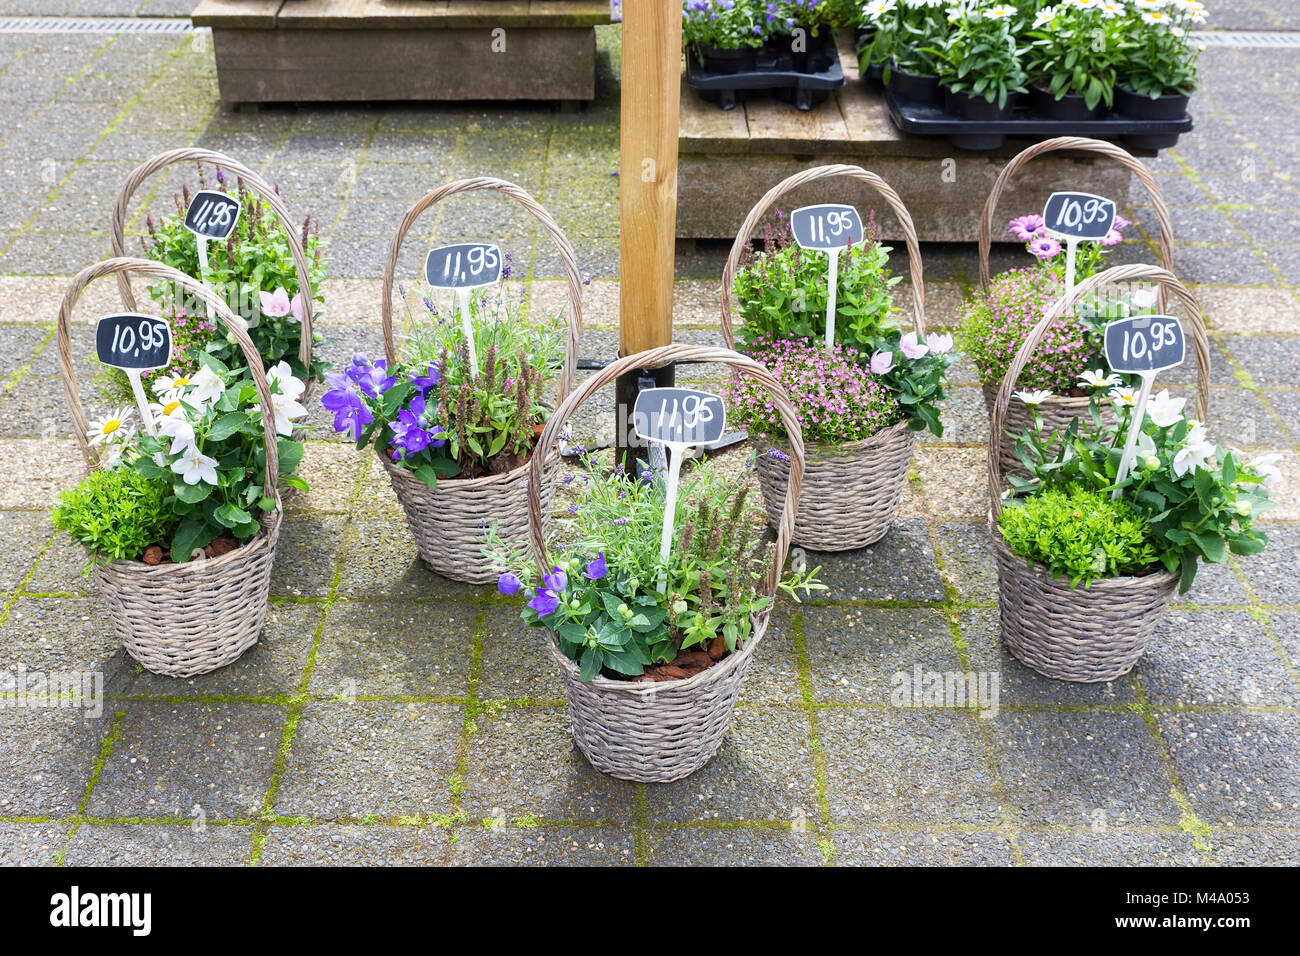 Several reed baskets with flowering plants on ground Stock Photo